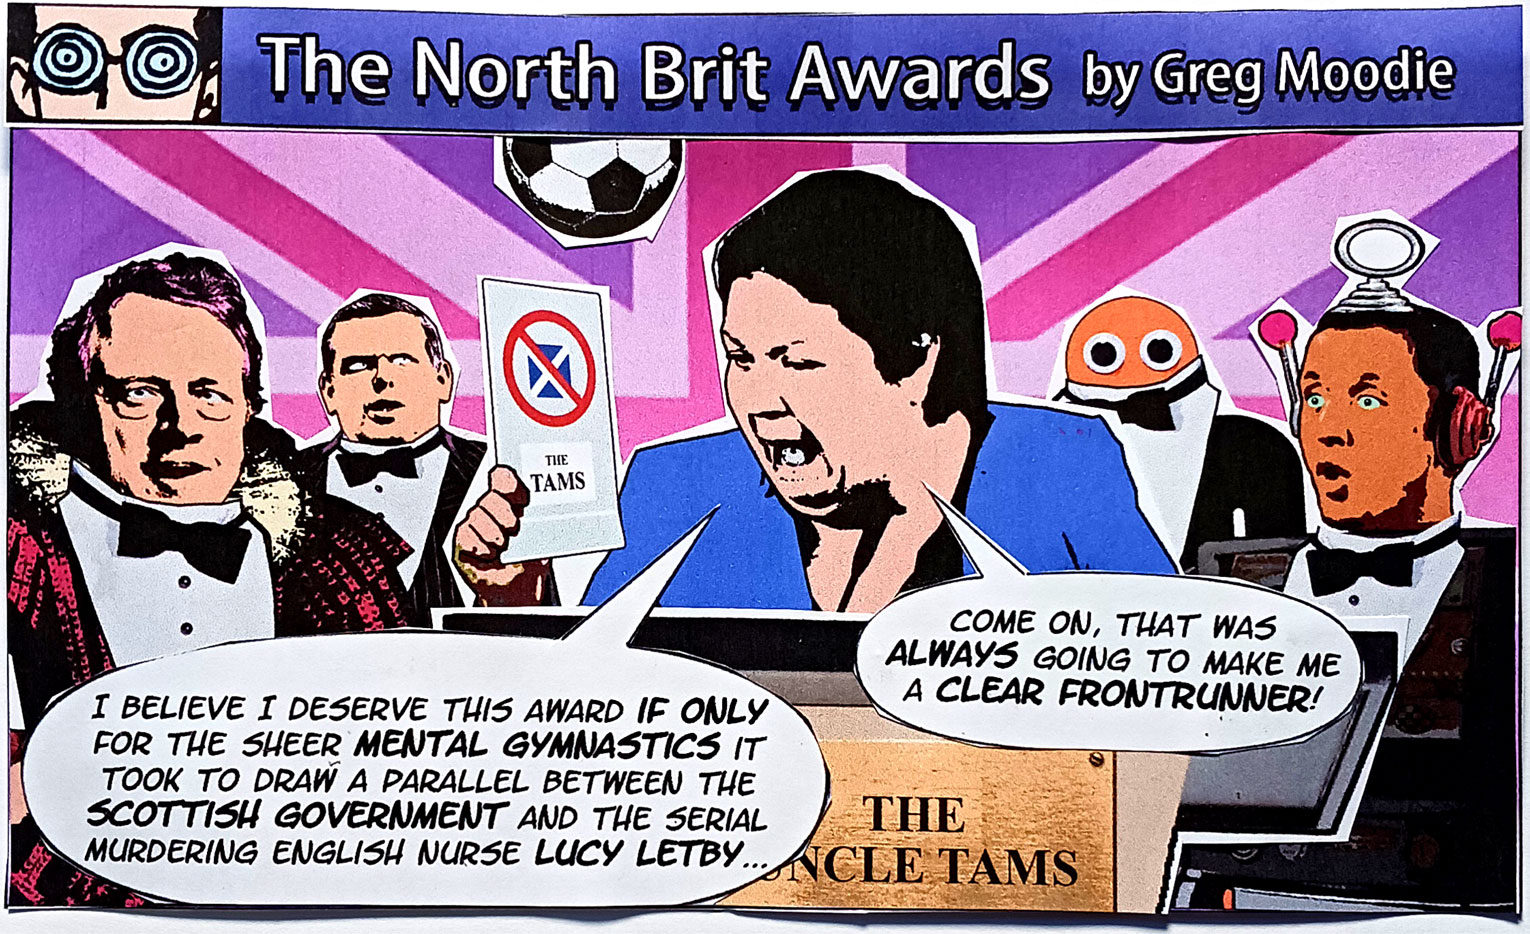 The North Brit Awards